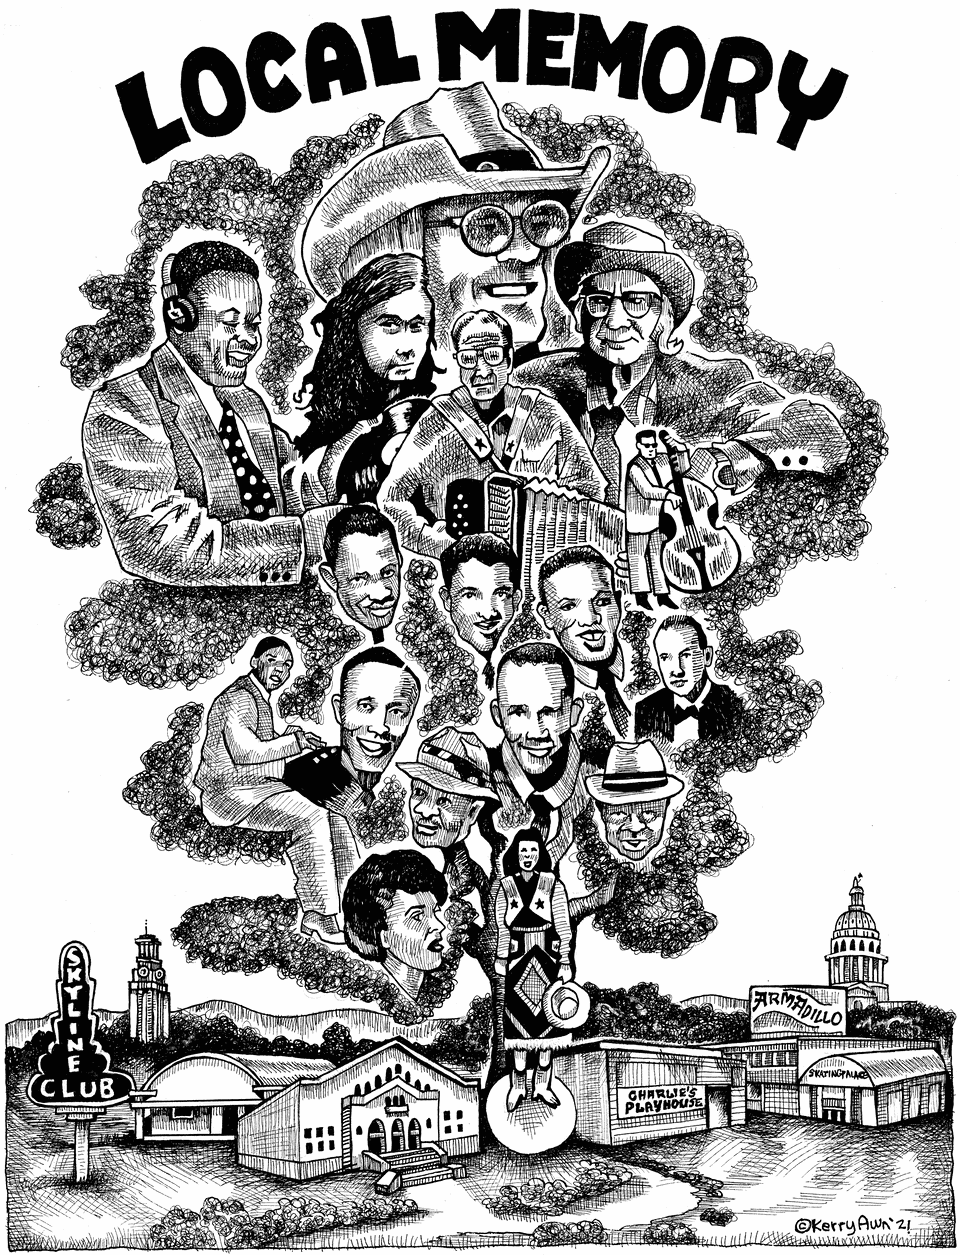 Hand-drawn poster by Kerry Awn depicting notable musicians and music venues from Austin